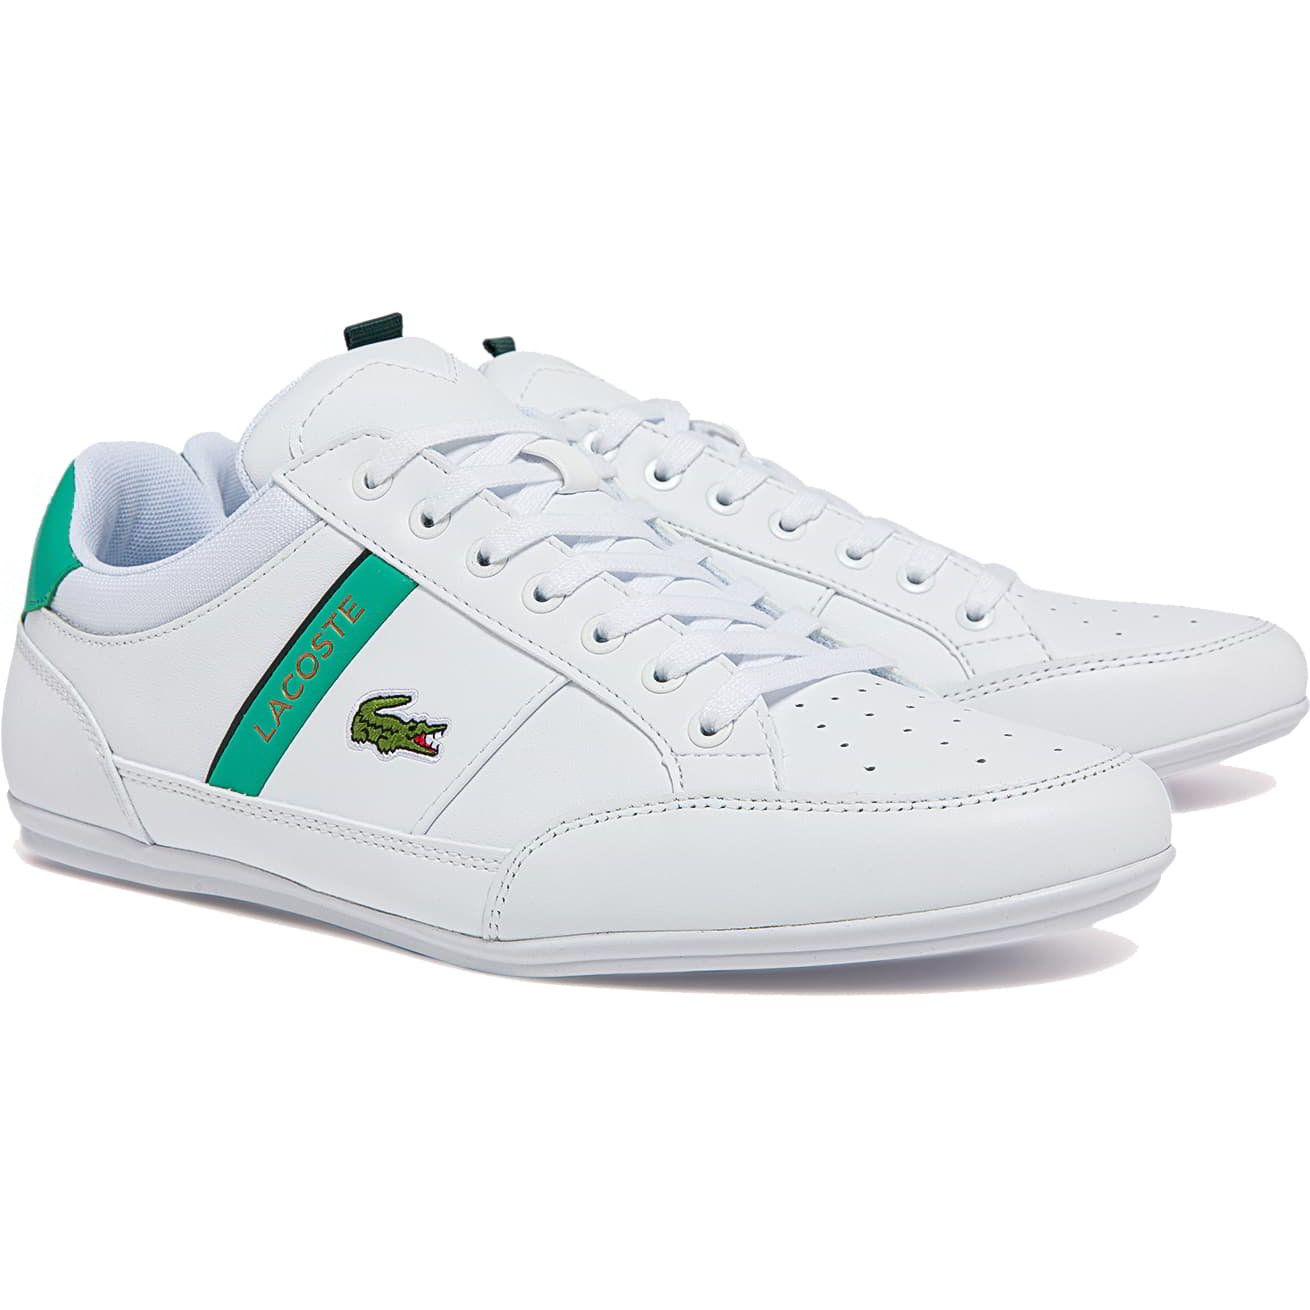 Lacoste Mens Chaymon 722-1 Leather Trainers - Uk 10